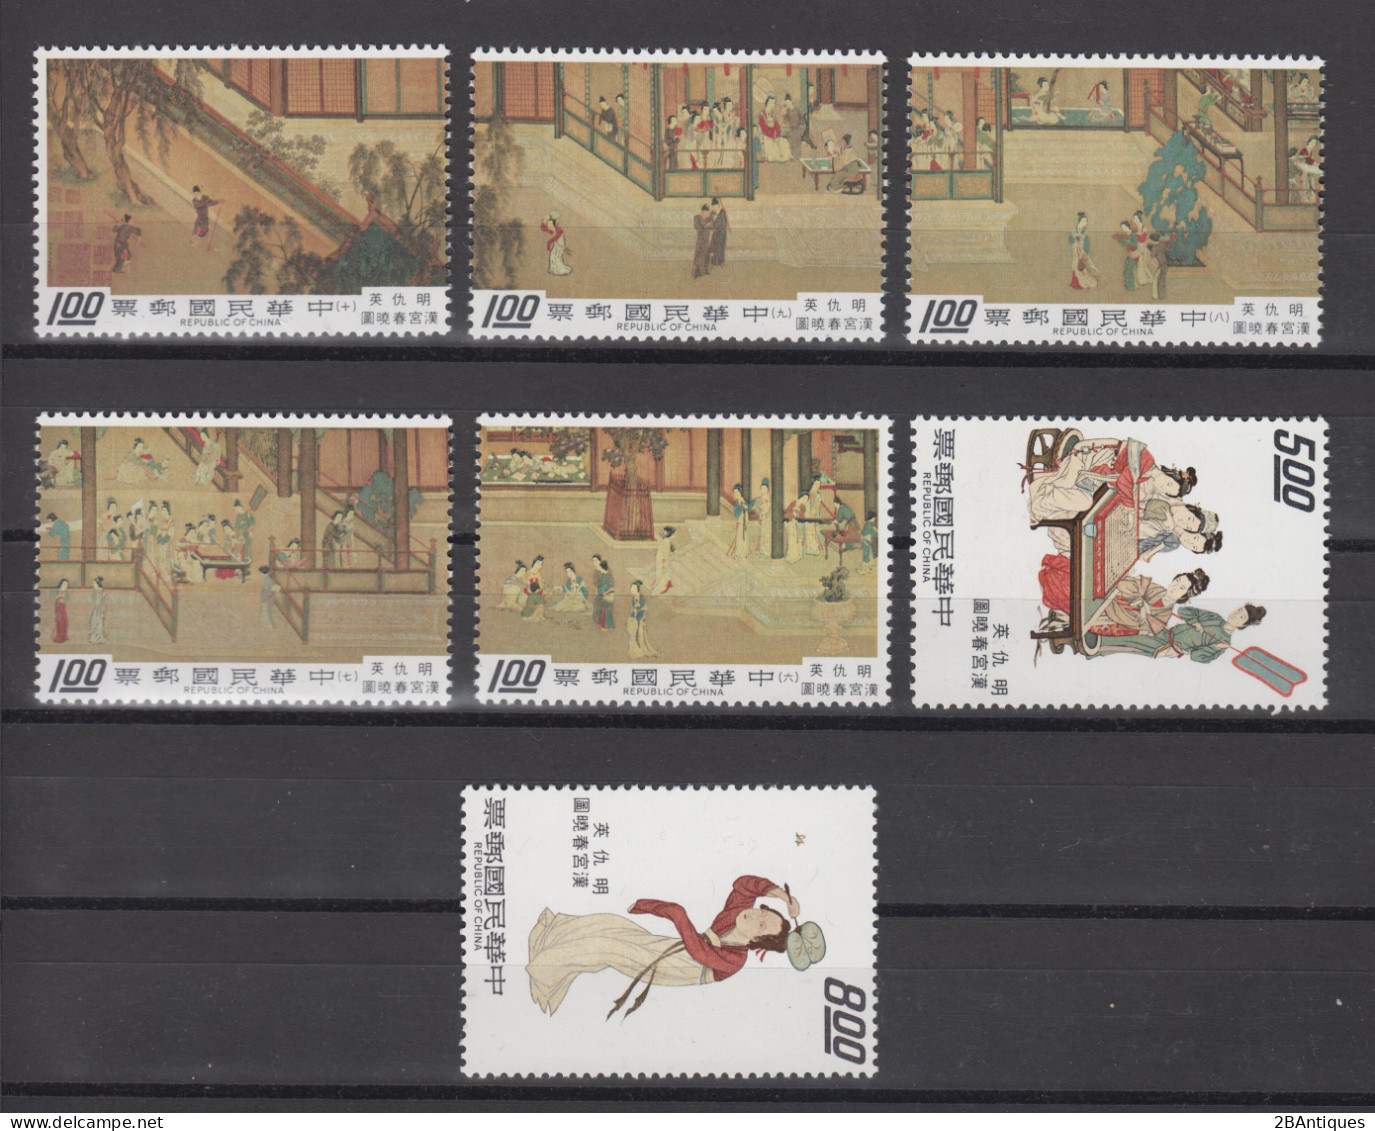 TAIWAN 1973 - "Spring Morning In The Han Palace" - Ming Dynasty Handscroll MNH** OG XF - Nuevos